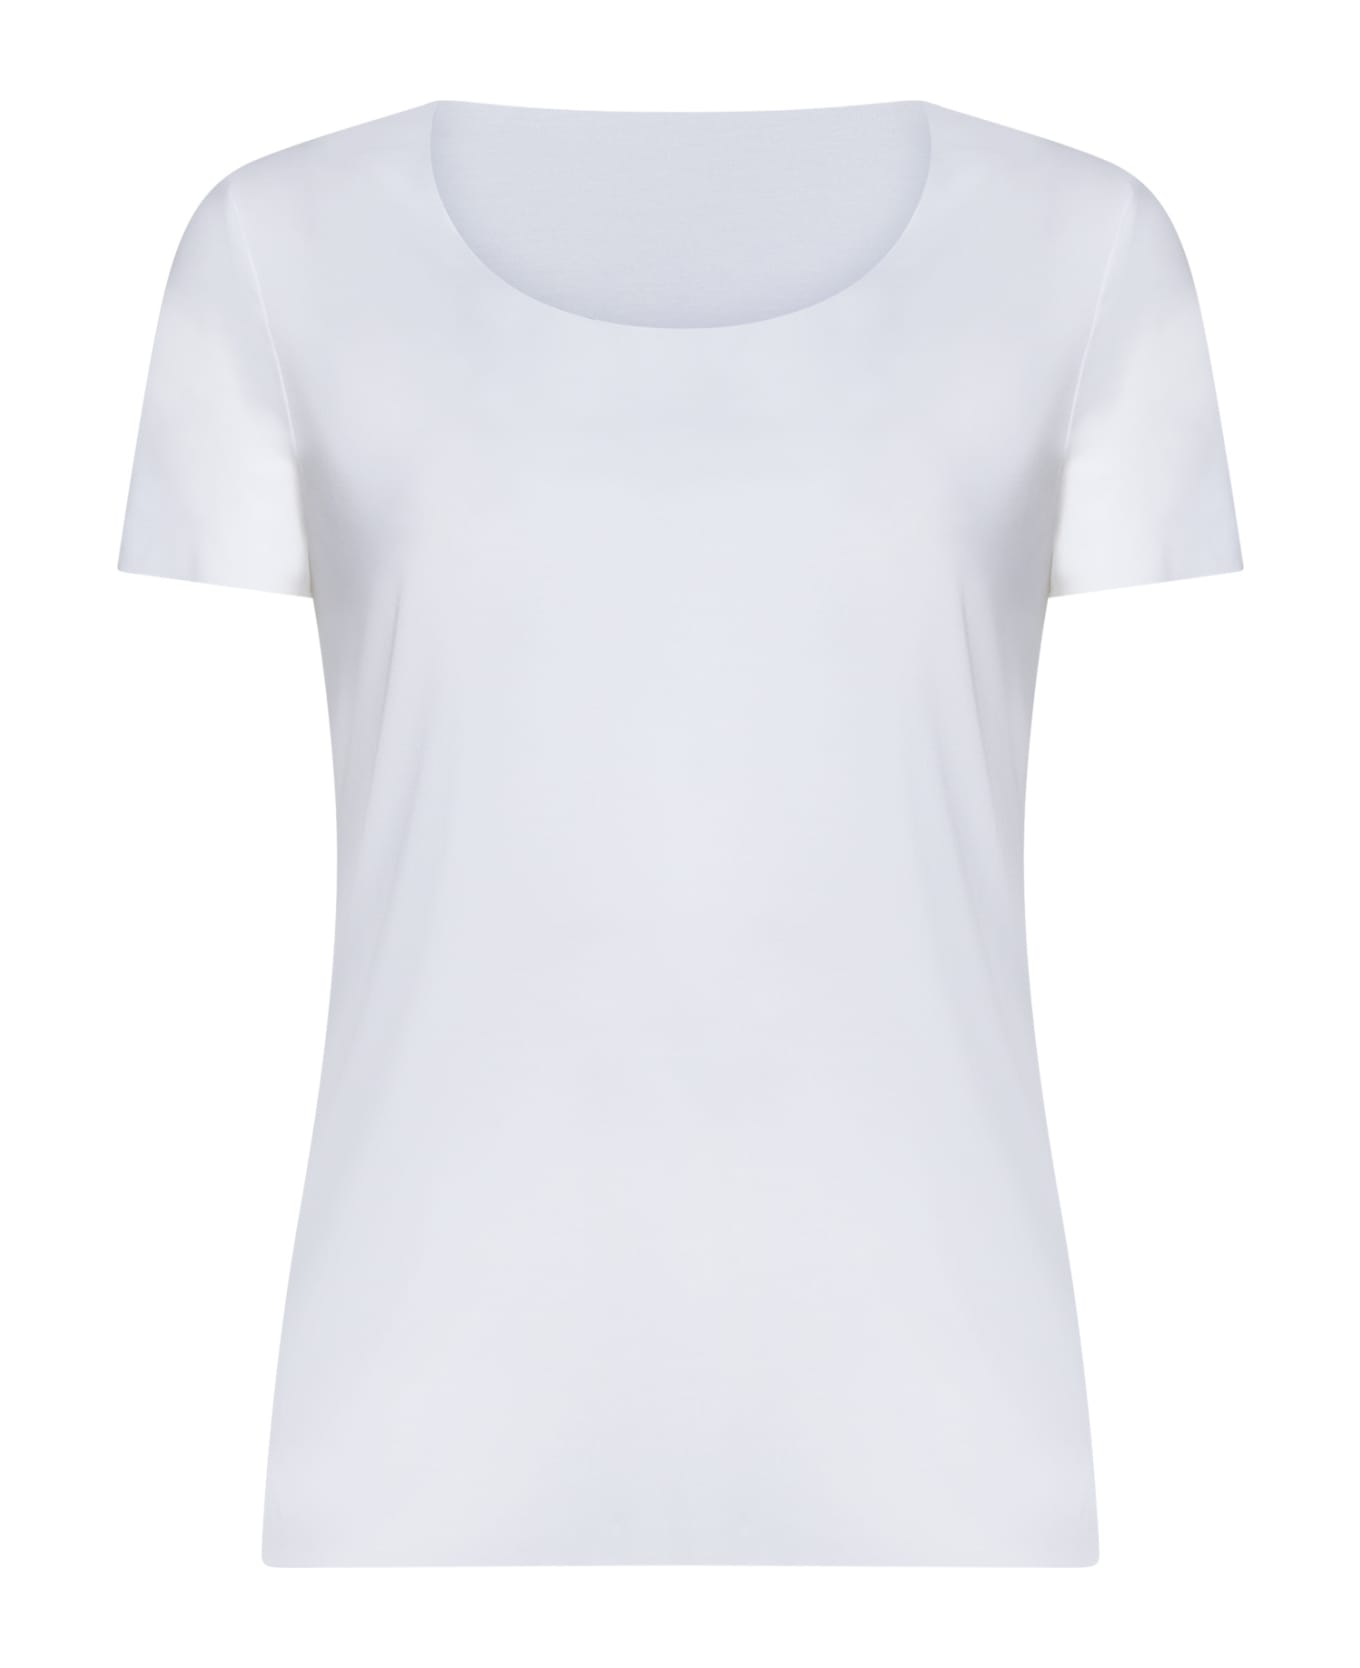 Wolford Top - White Tシャツ